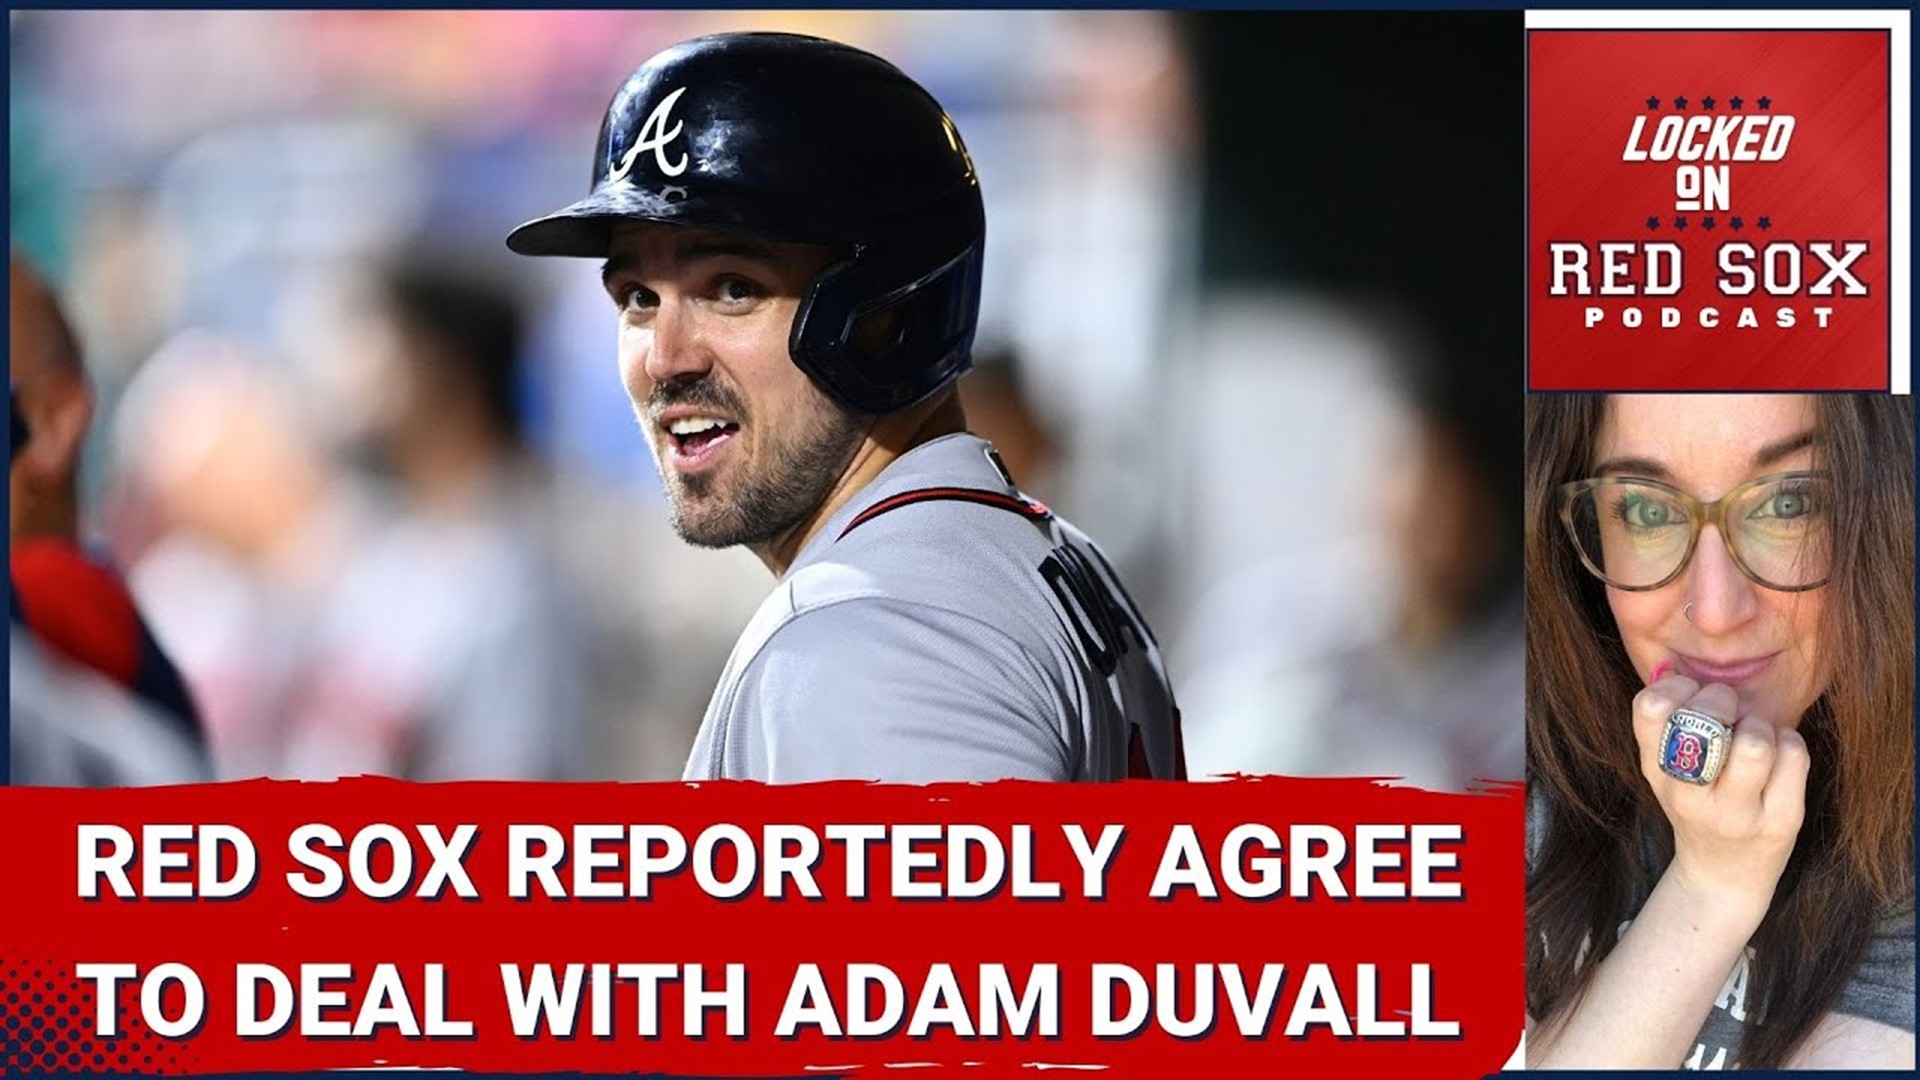 The Boston Red Sox made another offseason move when they reportedly agreed to a one-year deal with outfielder Adam Duvall on Wednesday morning.